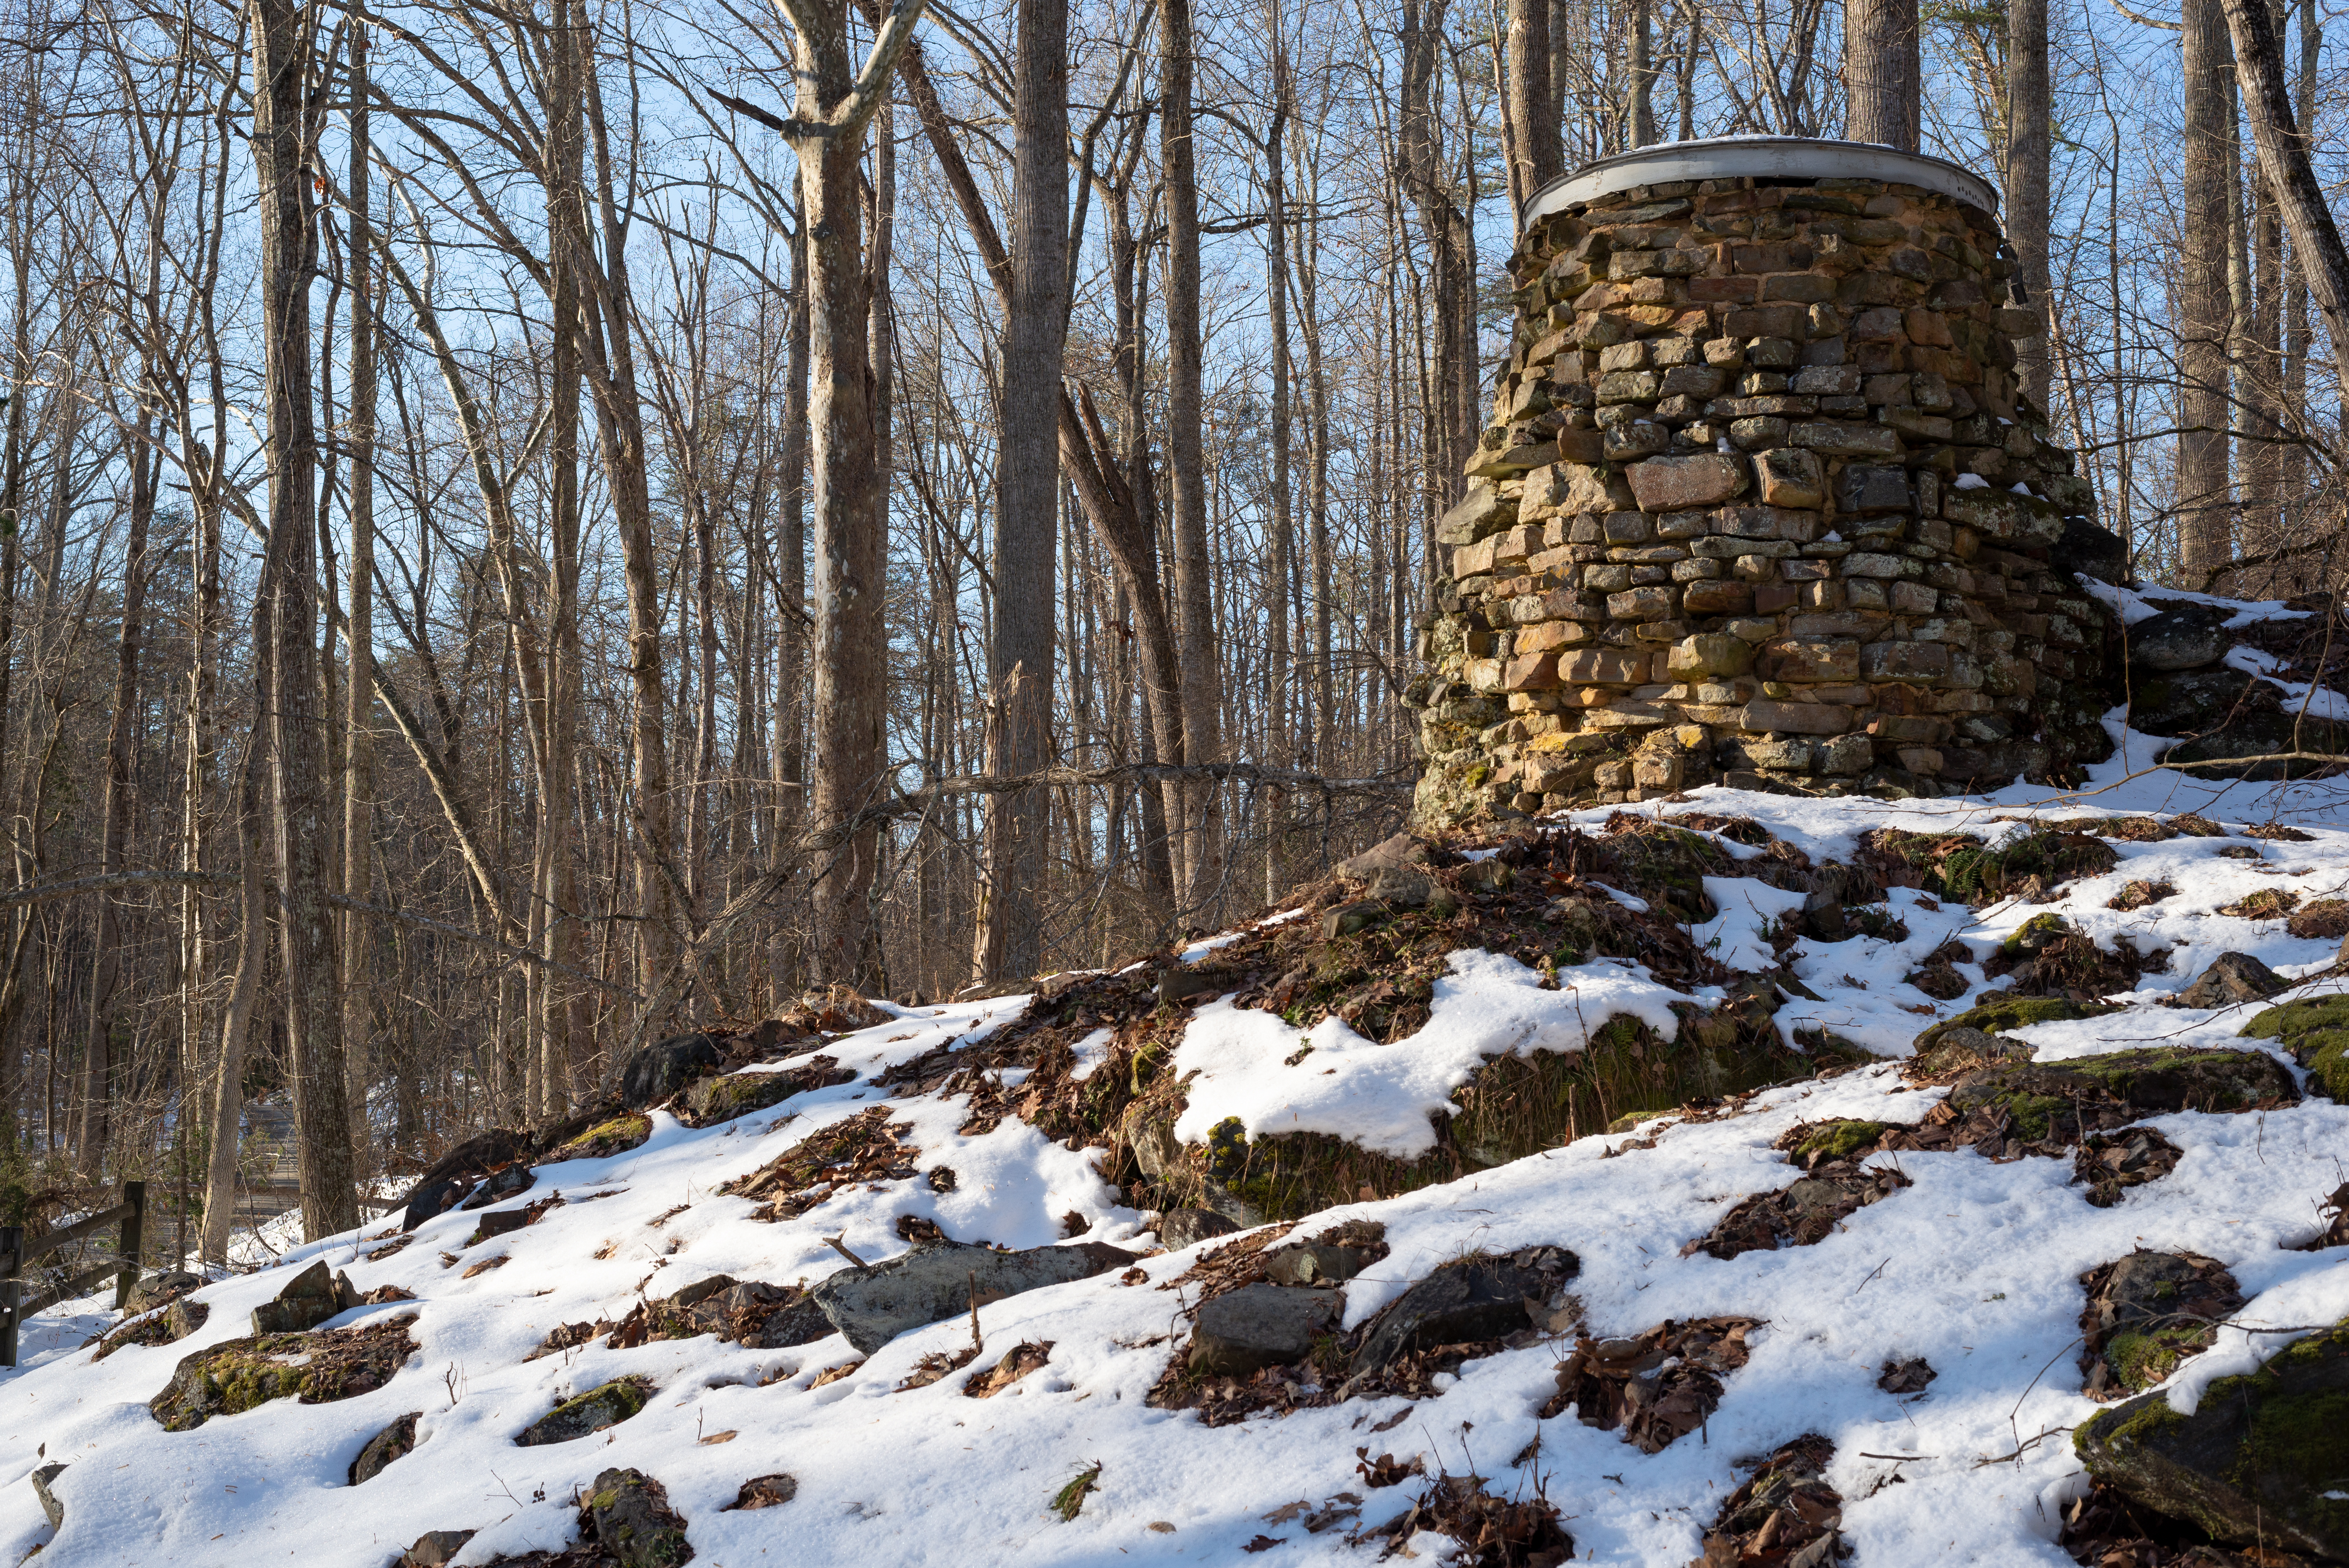 A stone furnace stack on a rocky mound surrounded by a thin layer of snow.